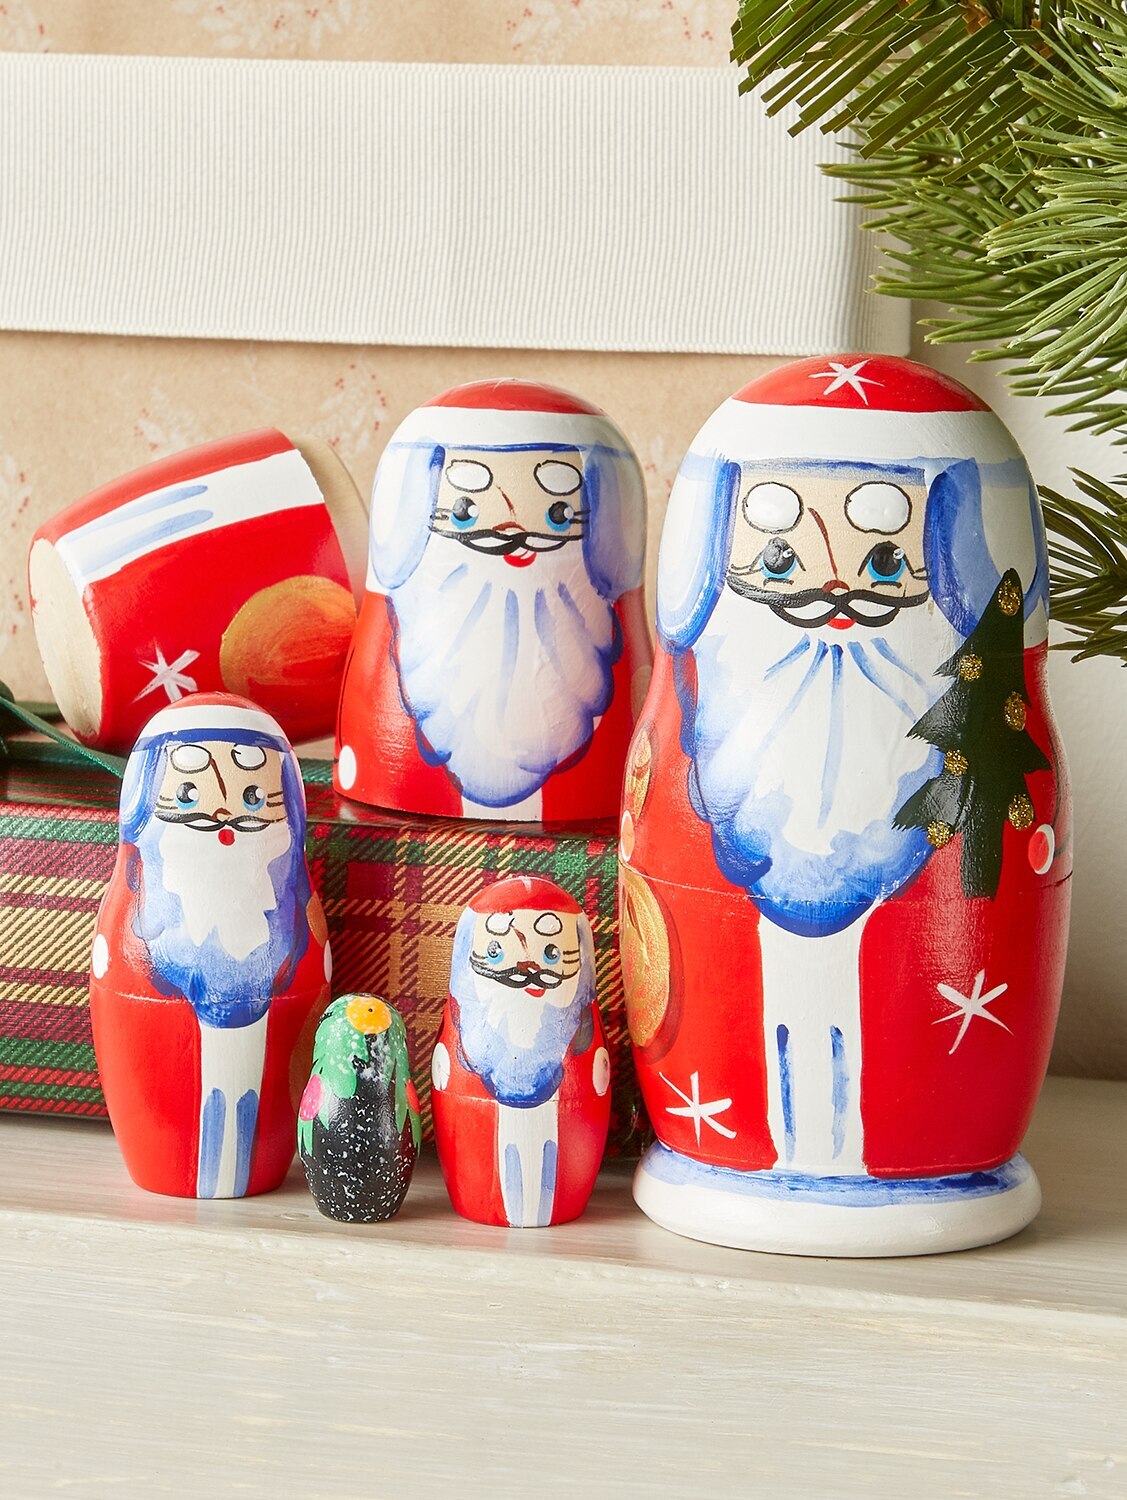 Russian Santa Claus Nesting Doll 5-pcs Set/Hand Made/Crafted/FREE SHIPPING IN US 